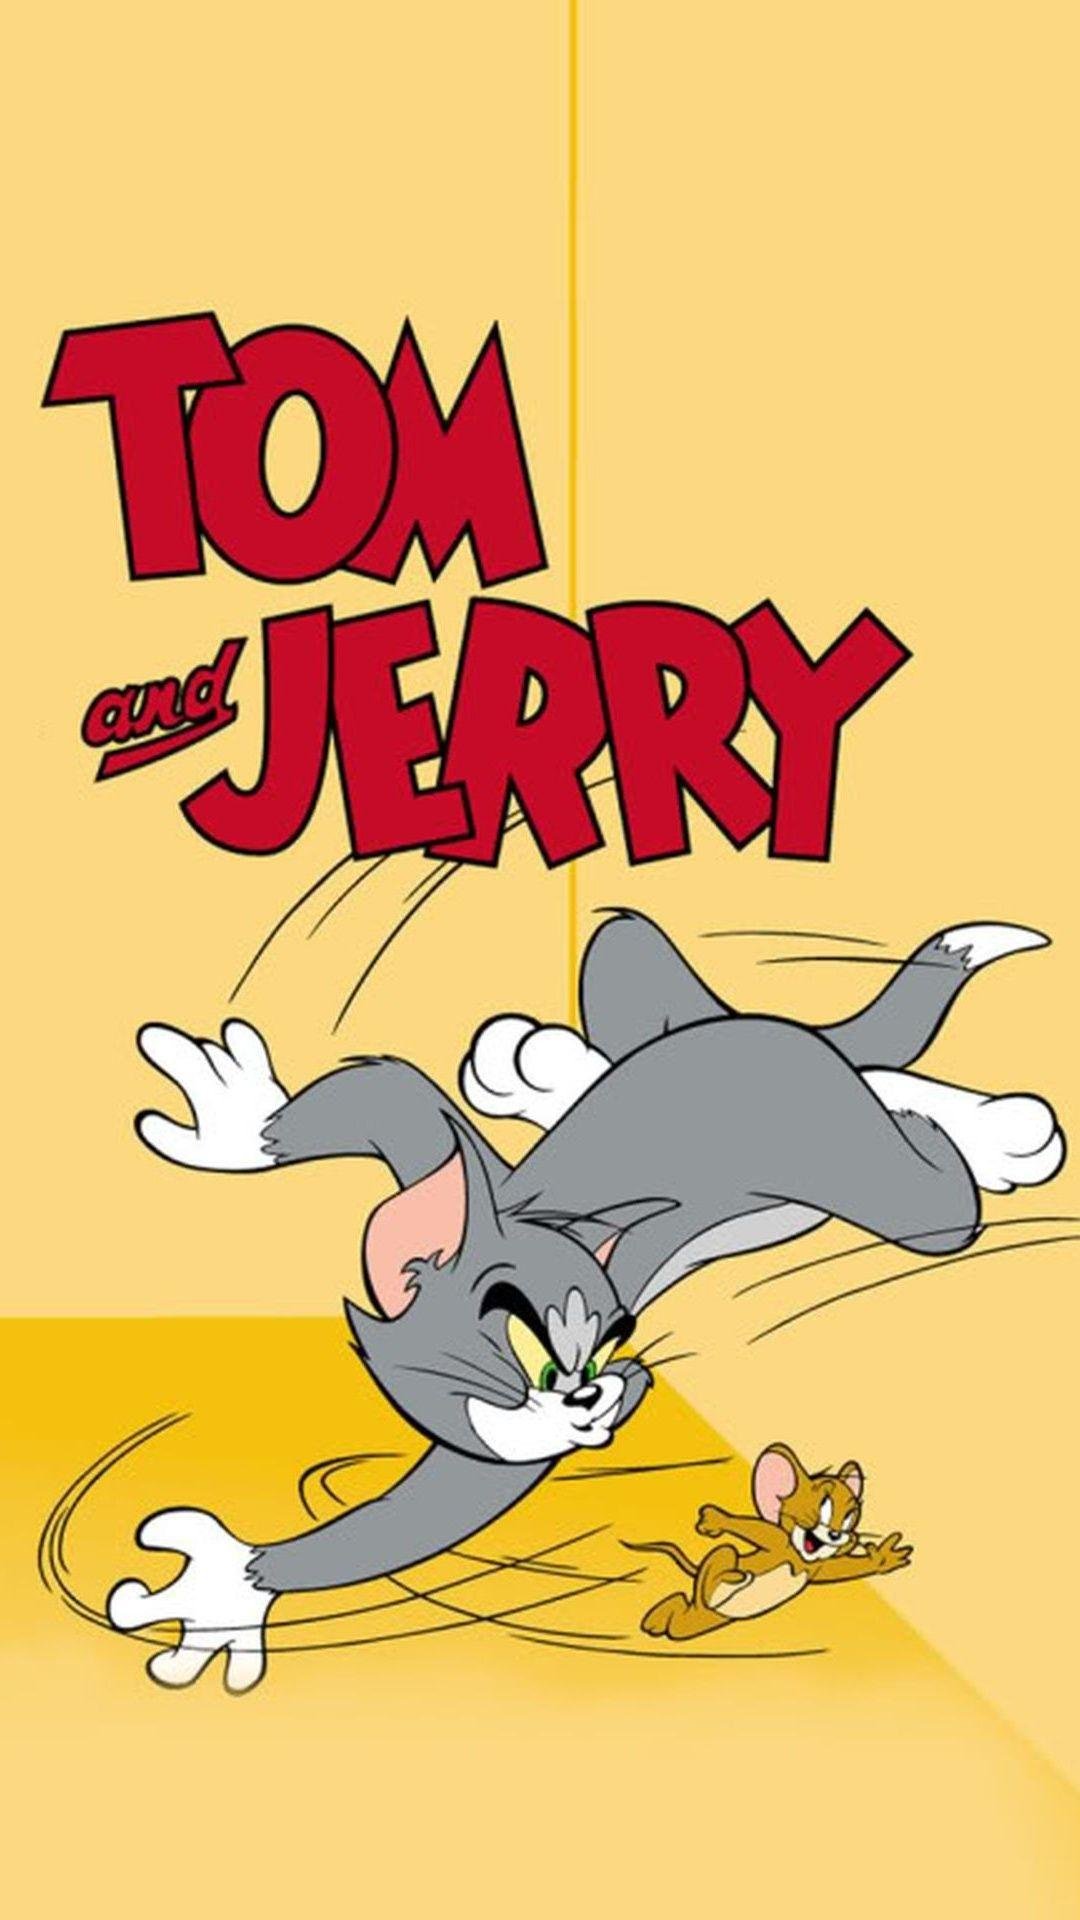 Tom and jerry cartoon poster